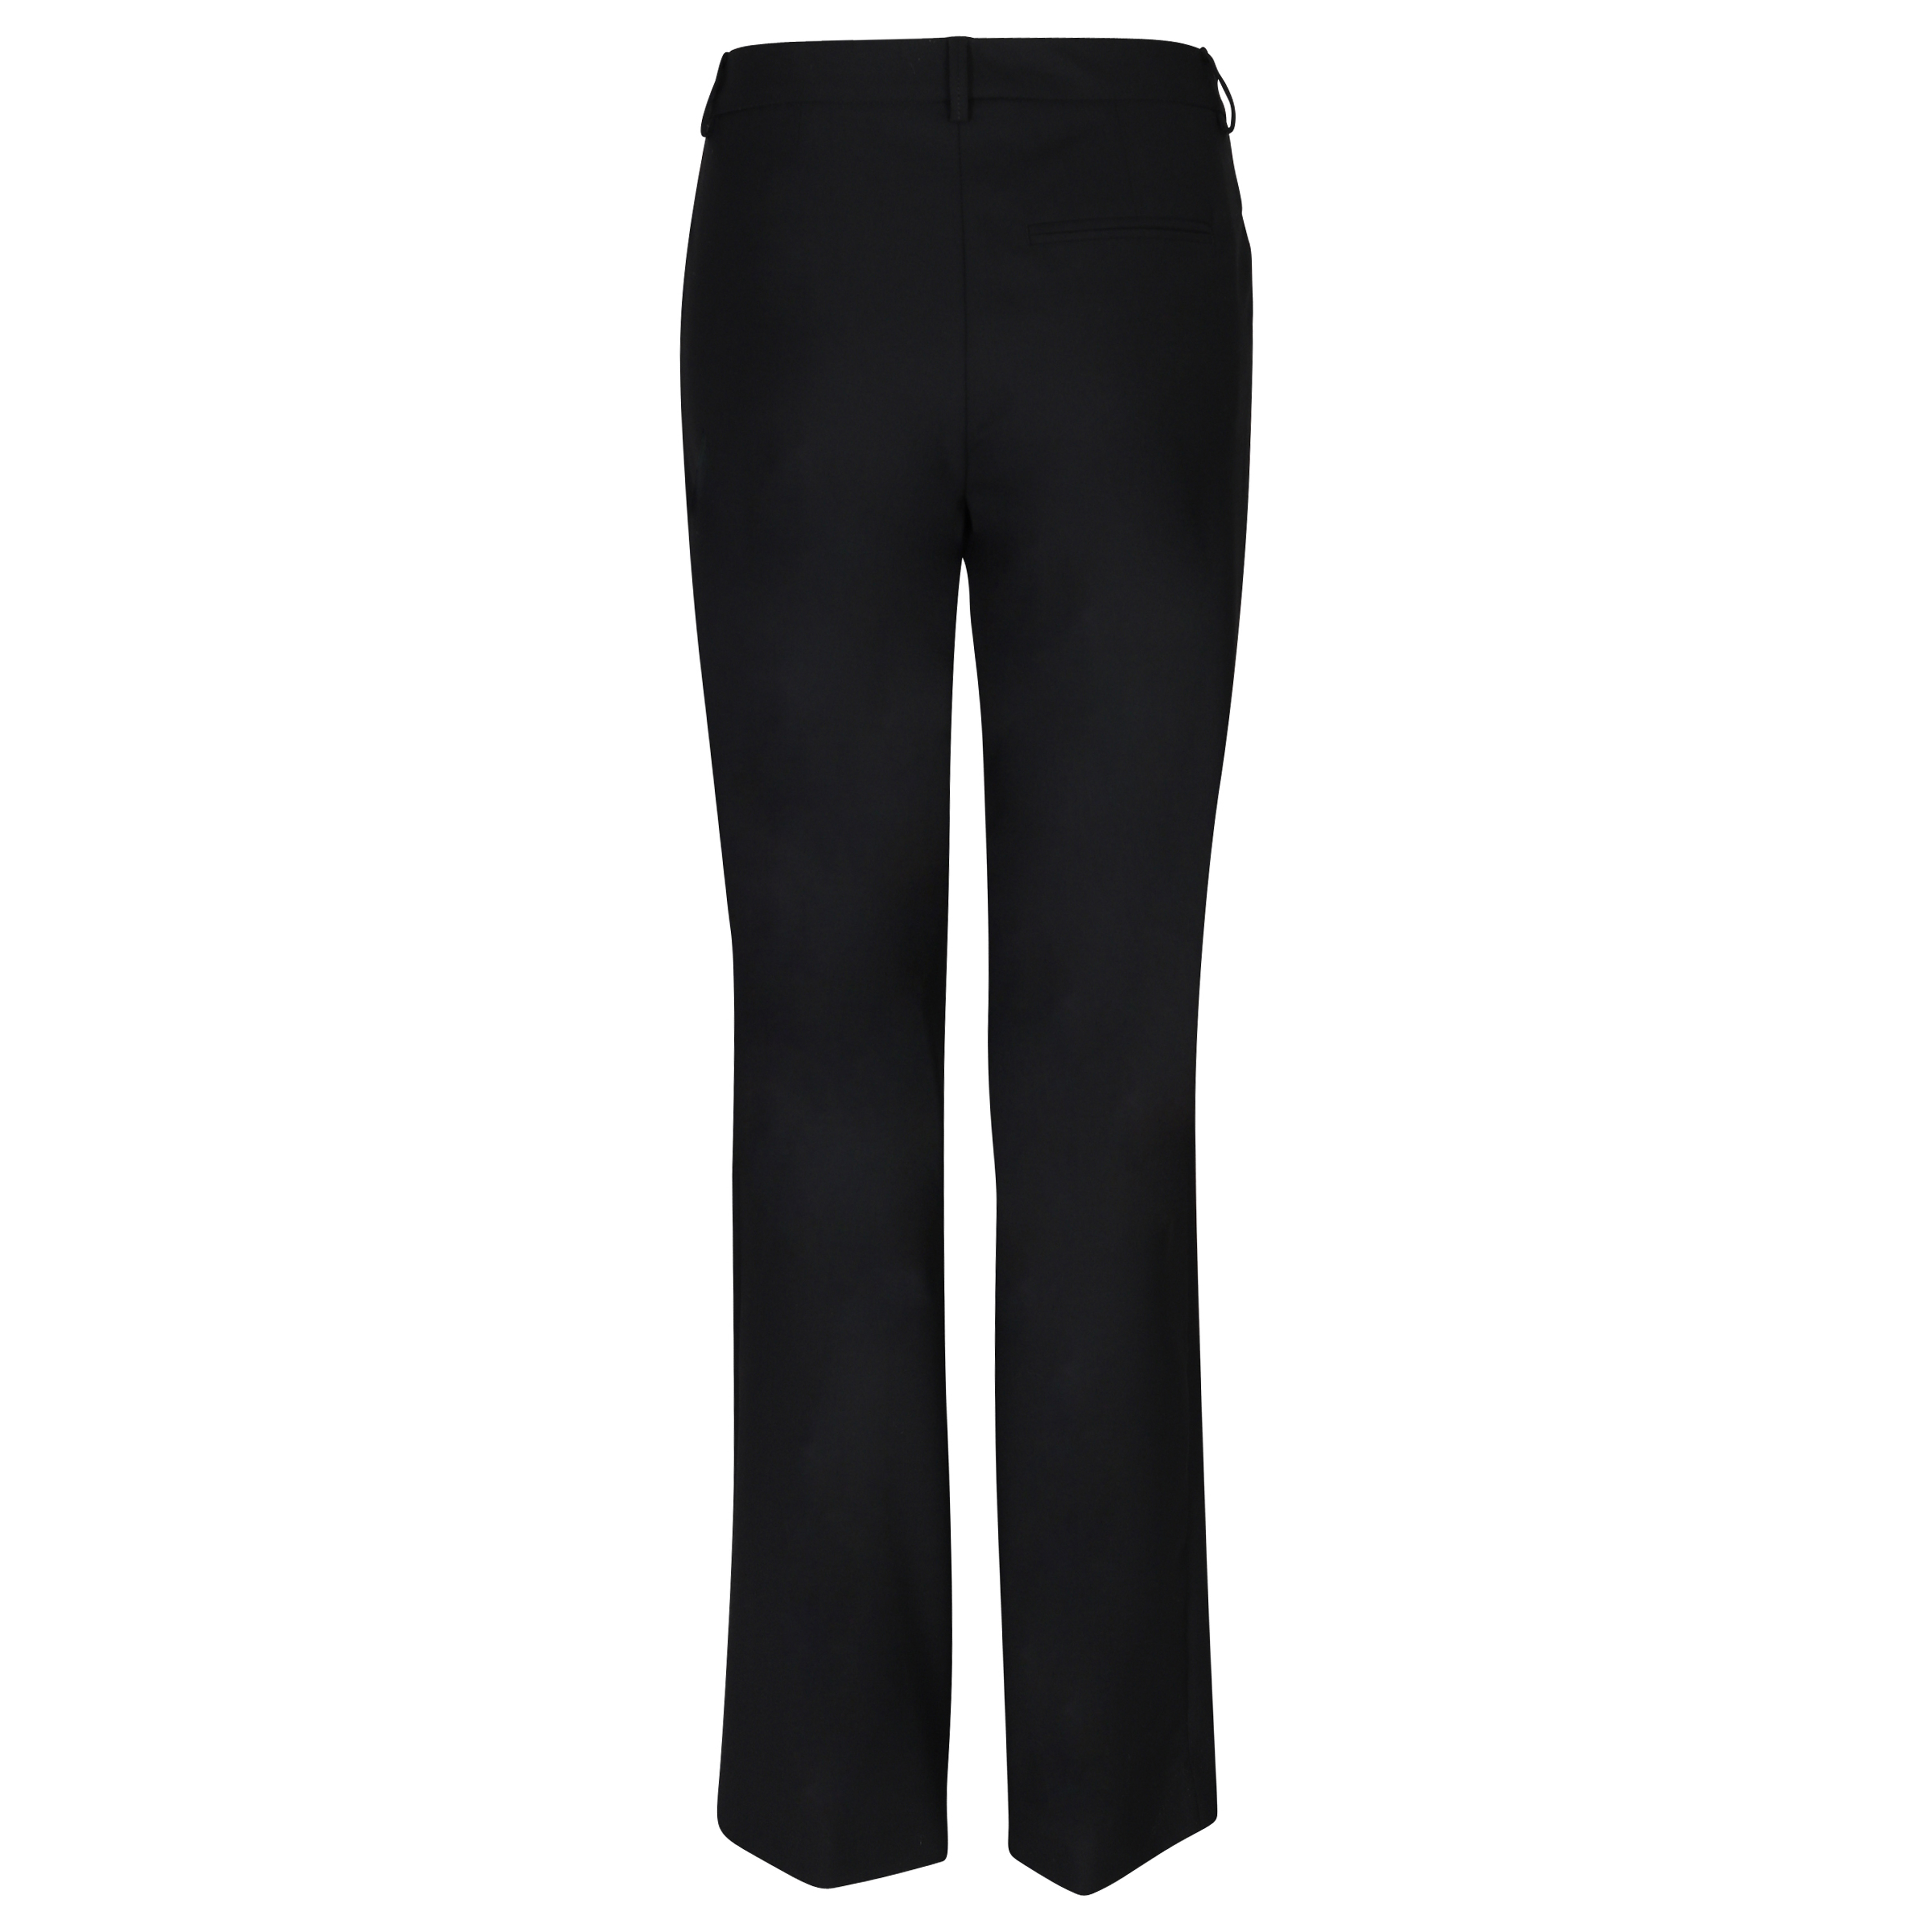 Closed Bryson Pant in Black